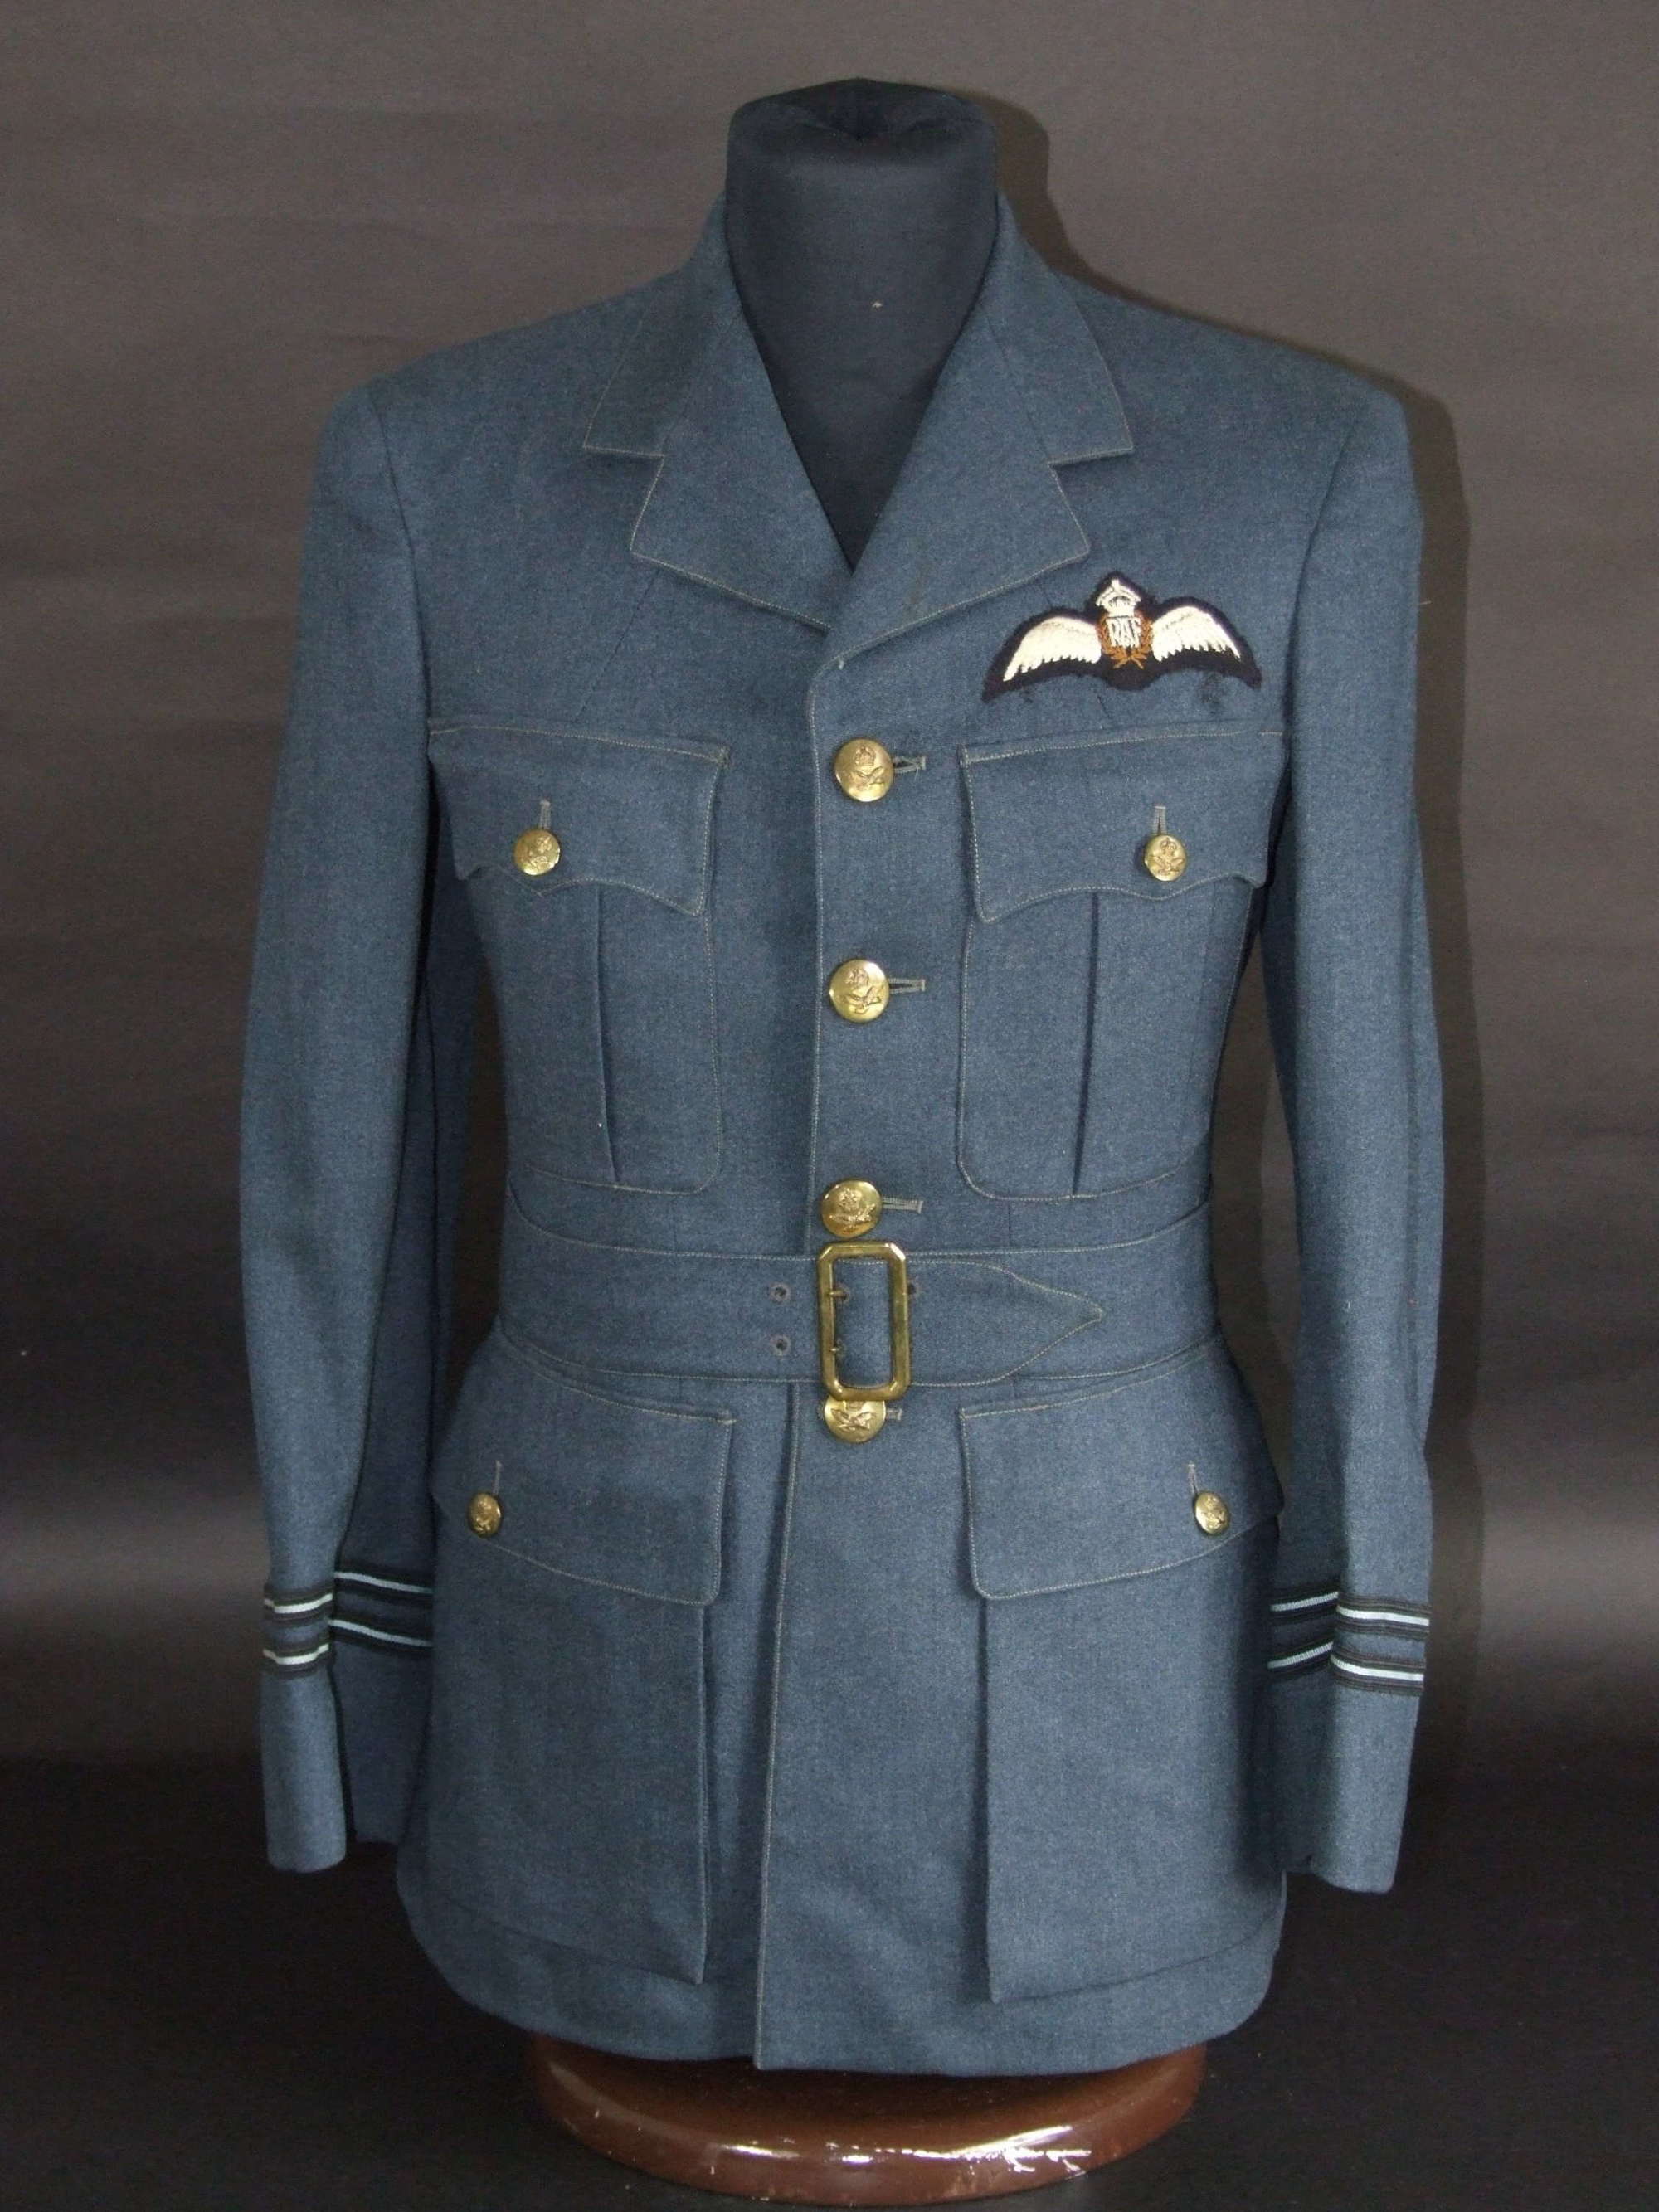 Stores Issued RAF Officer's Jacket Blue Grey